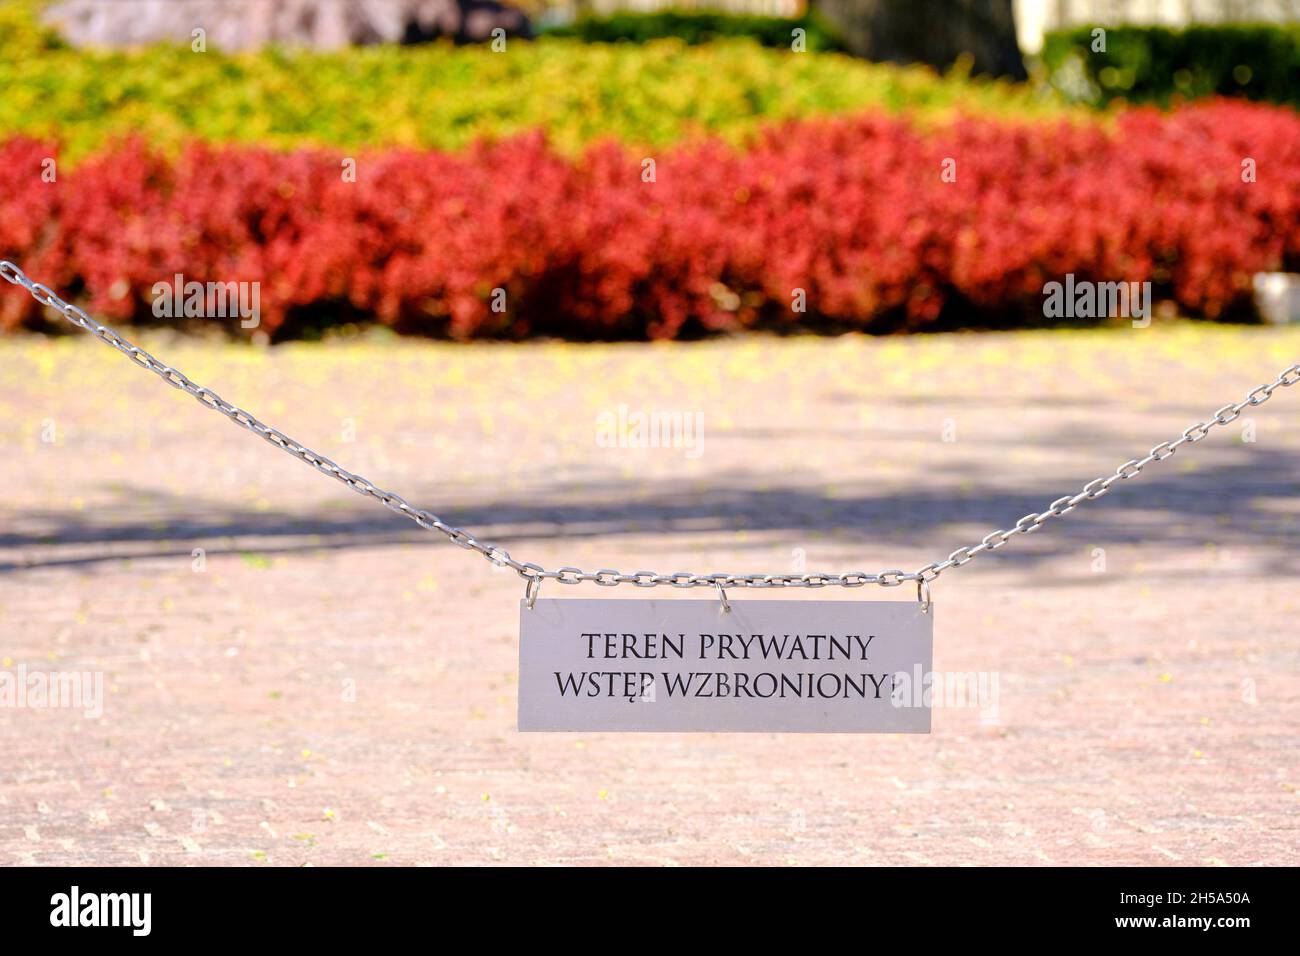 Private property sign in Polish 'Teren Prywatny - wstęp wzbroniony' (private property -access forbidden) Stock Photo